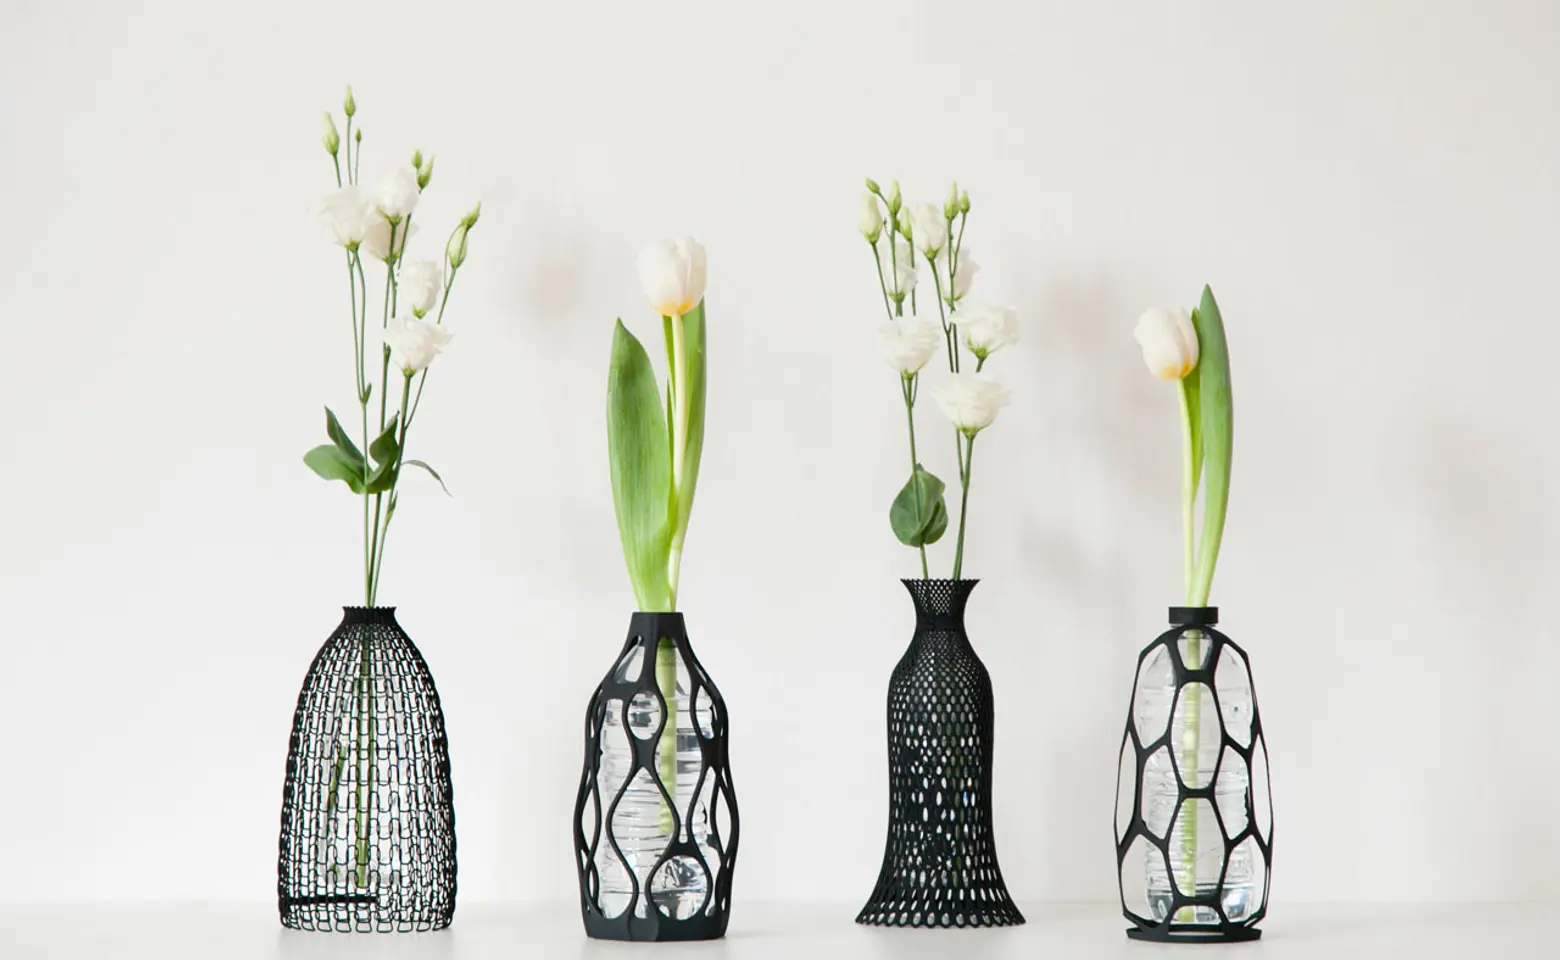 3D-Printed Vase Exteriors Give New Life to Used Plastic Bottles